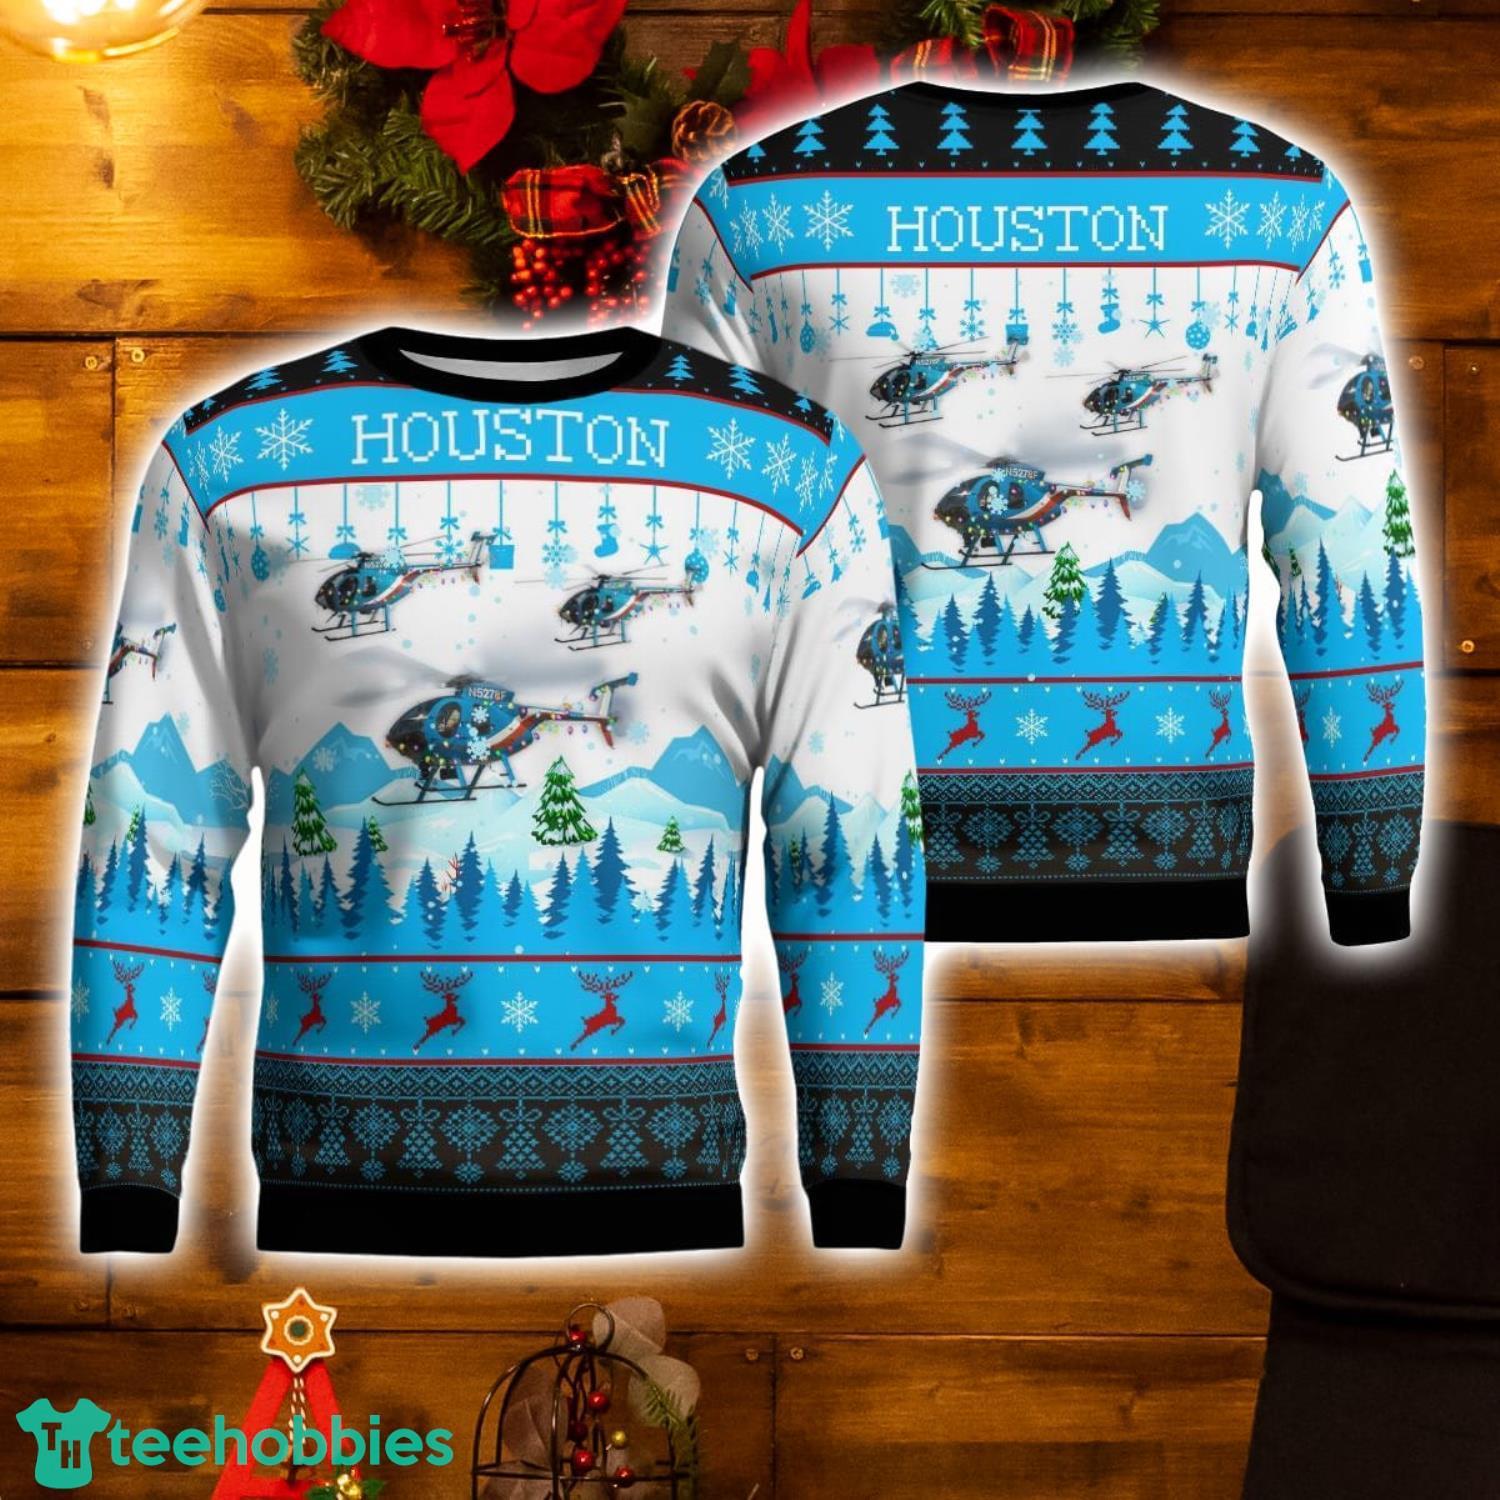 Samurai Cop Gifts For Family Christmas Holiday Ugly Sweater - Horusteez